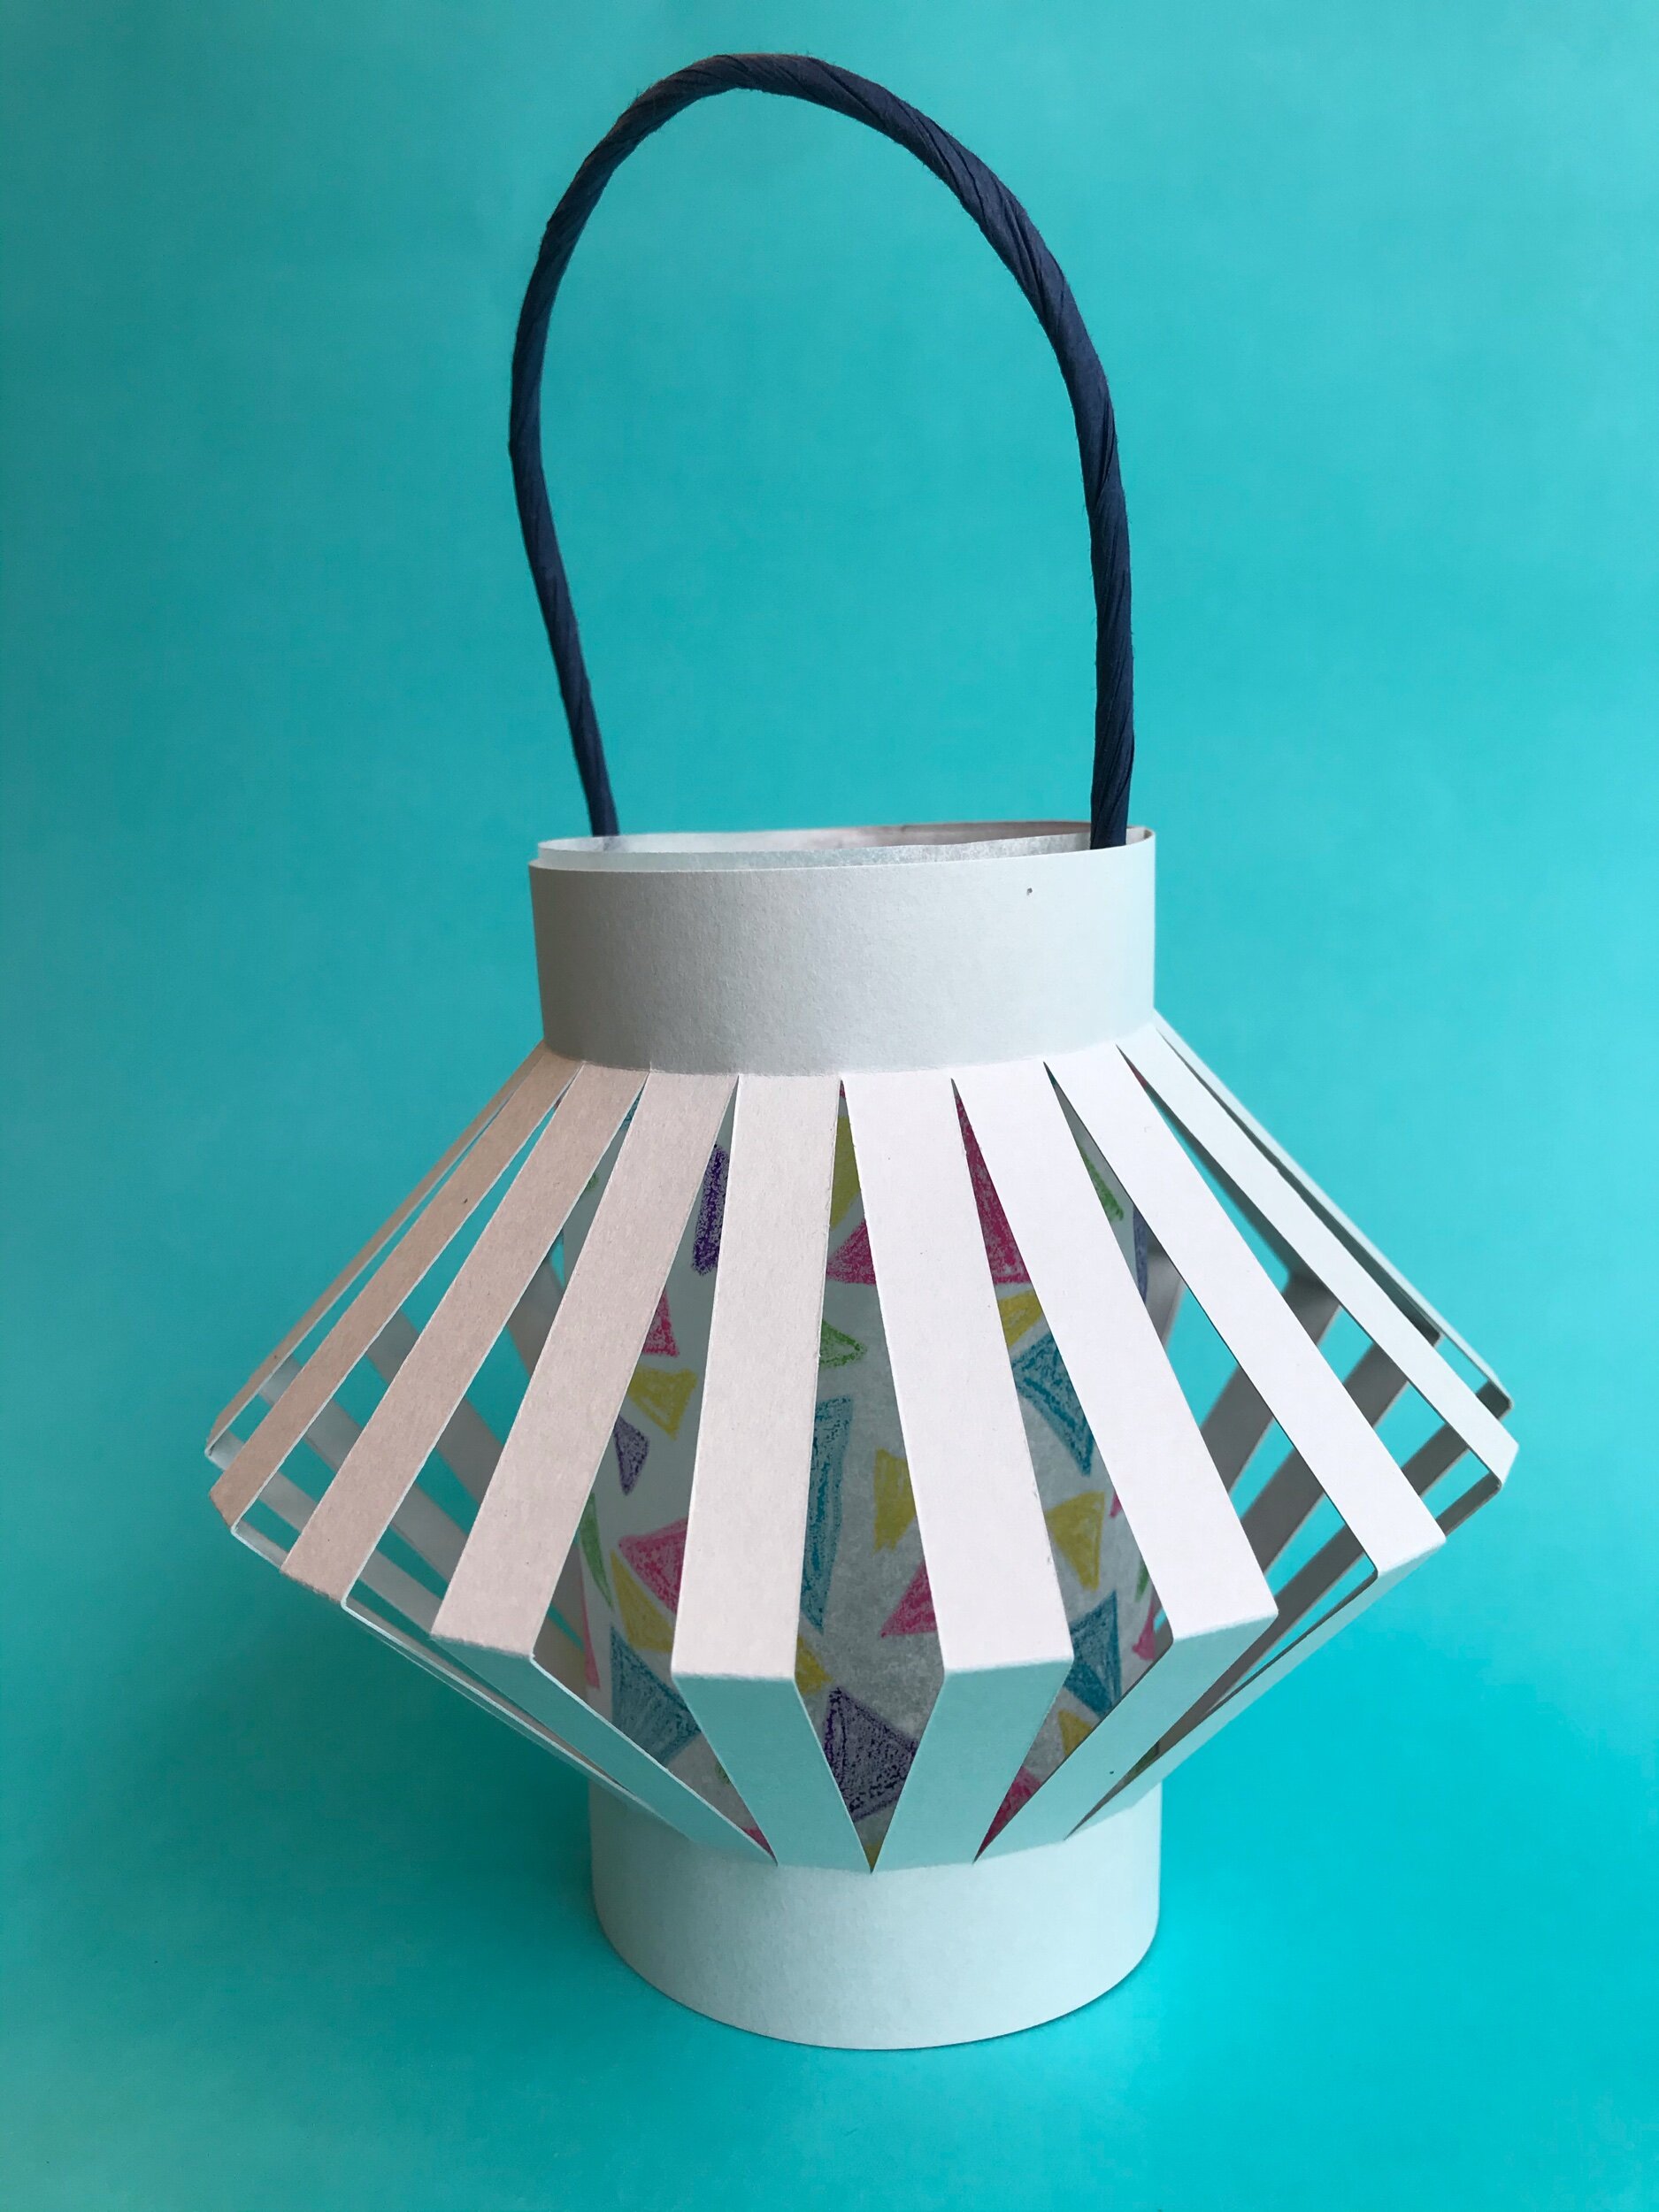 How To Make An Easy Paper Lantern